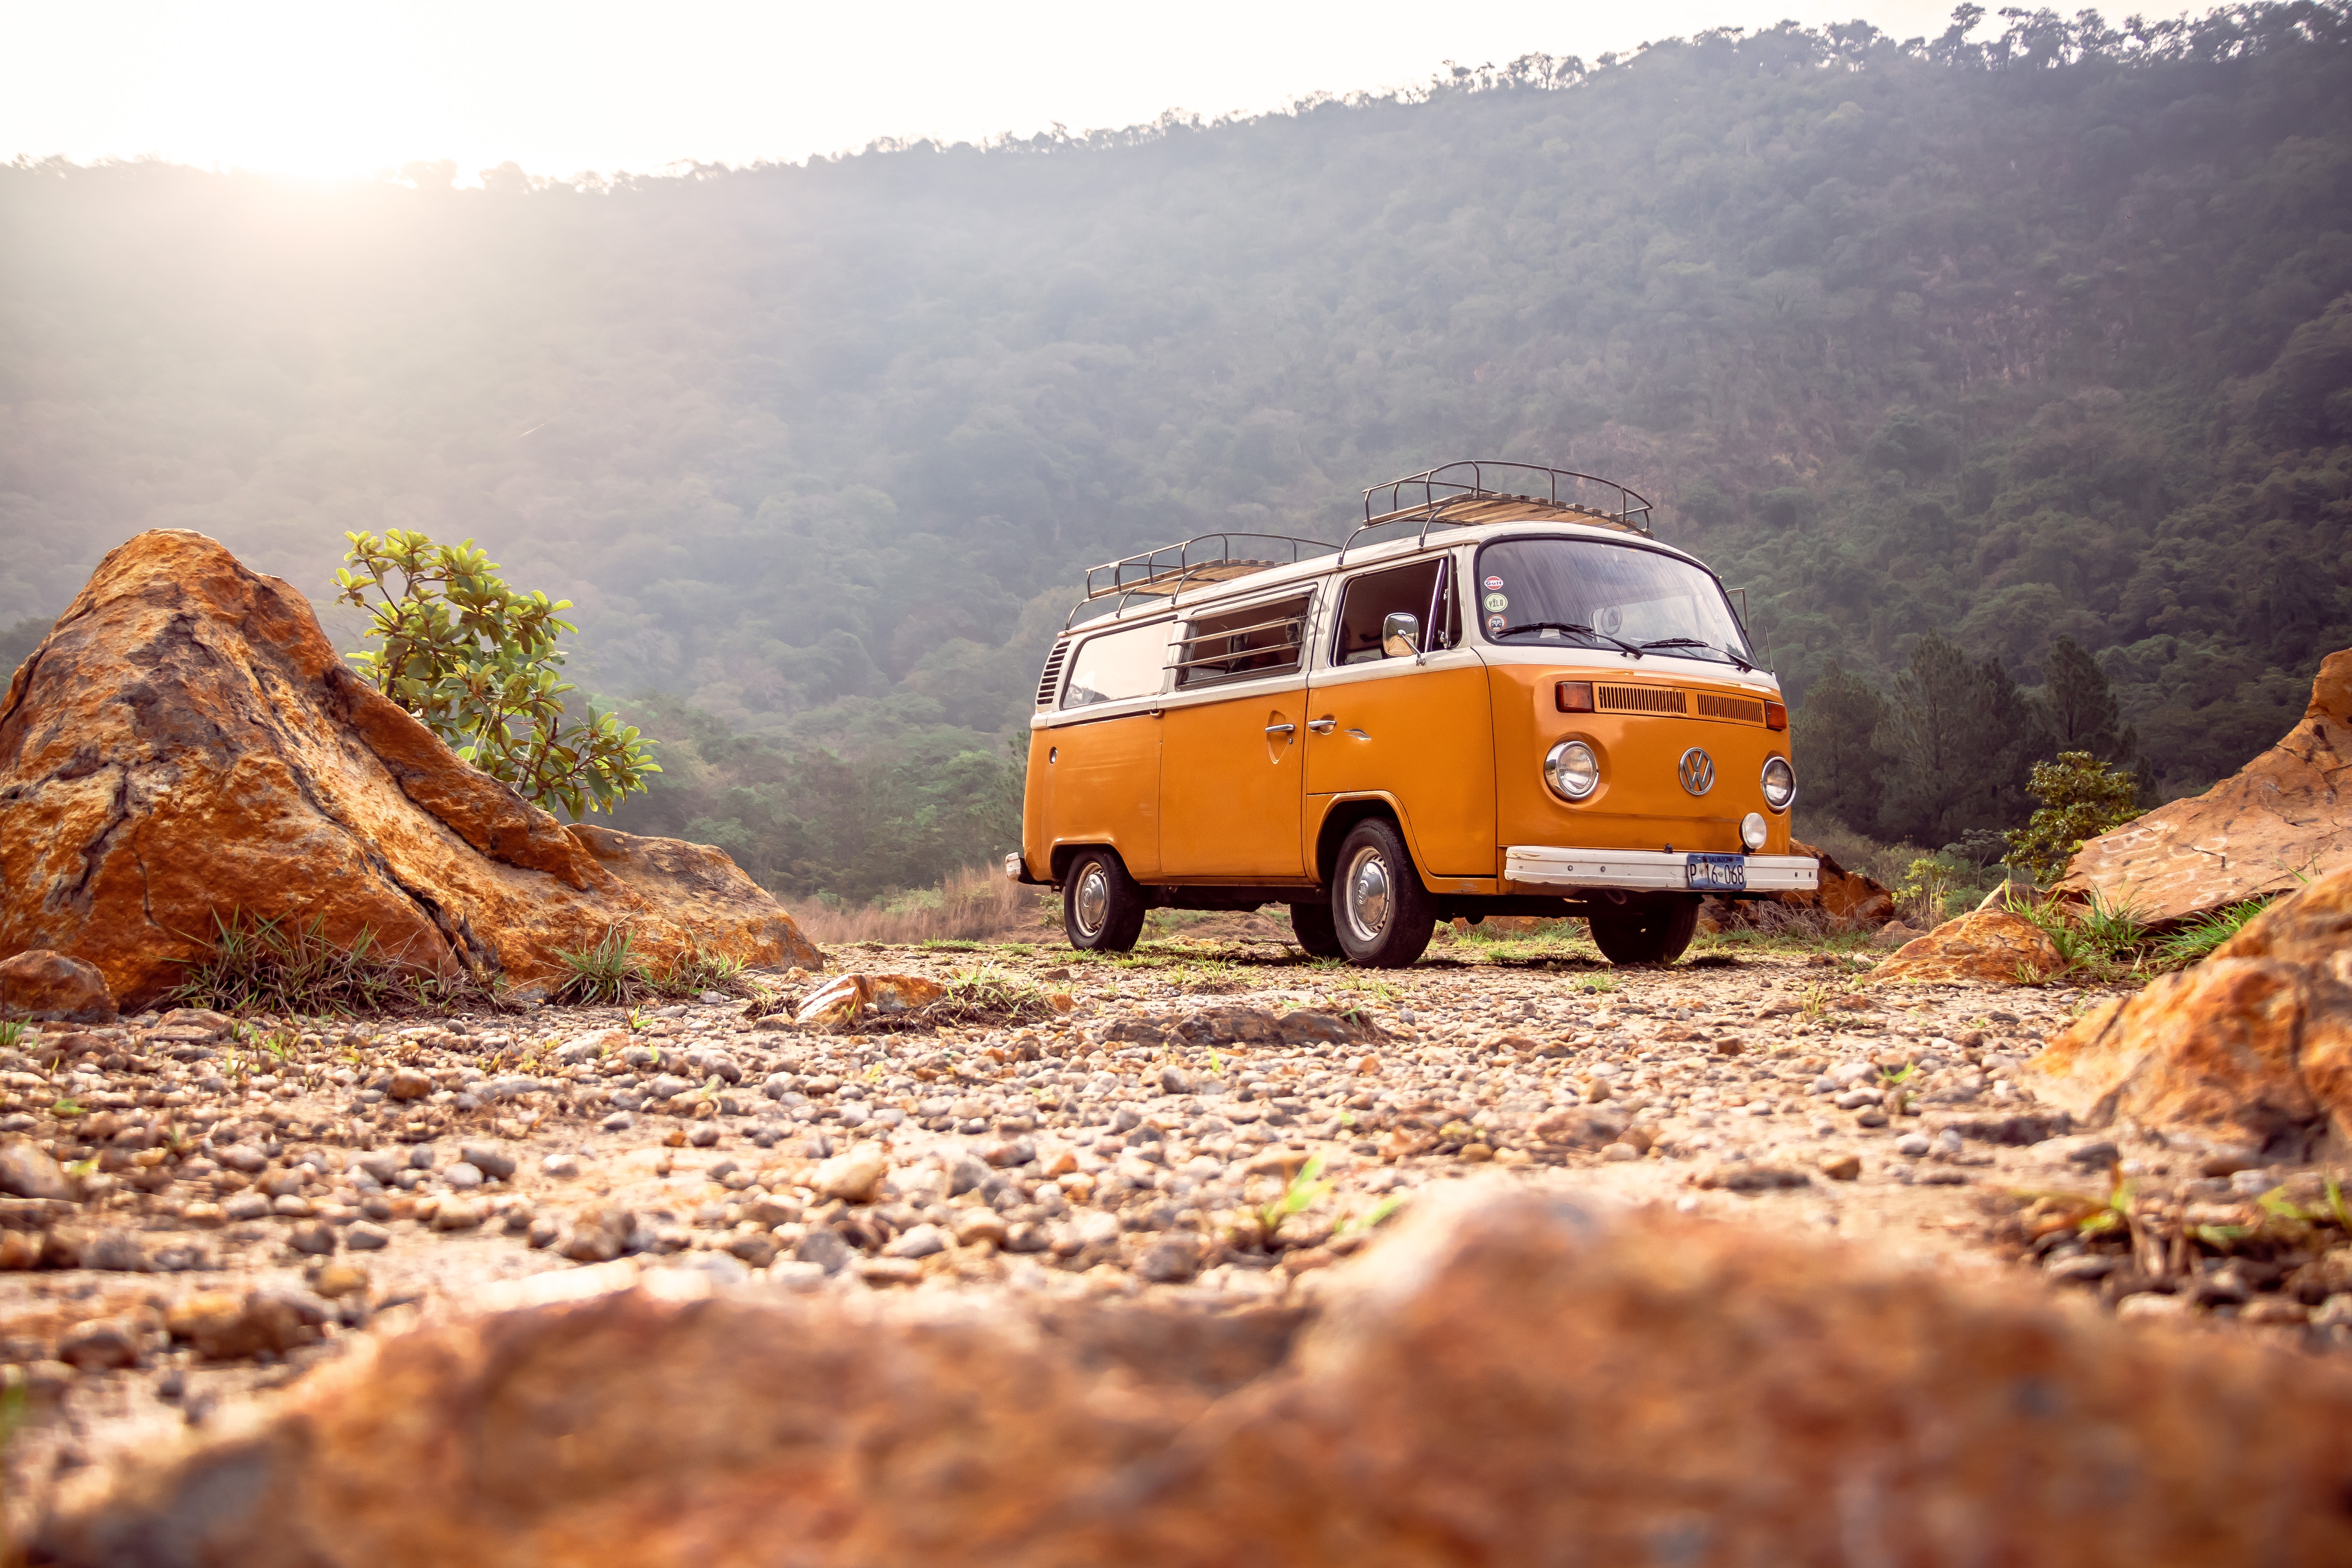 A photograph of an old white and orange volkswagen.